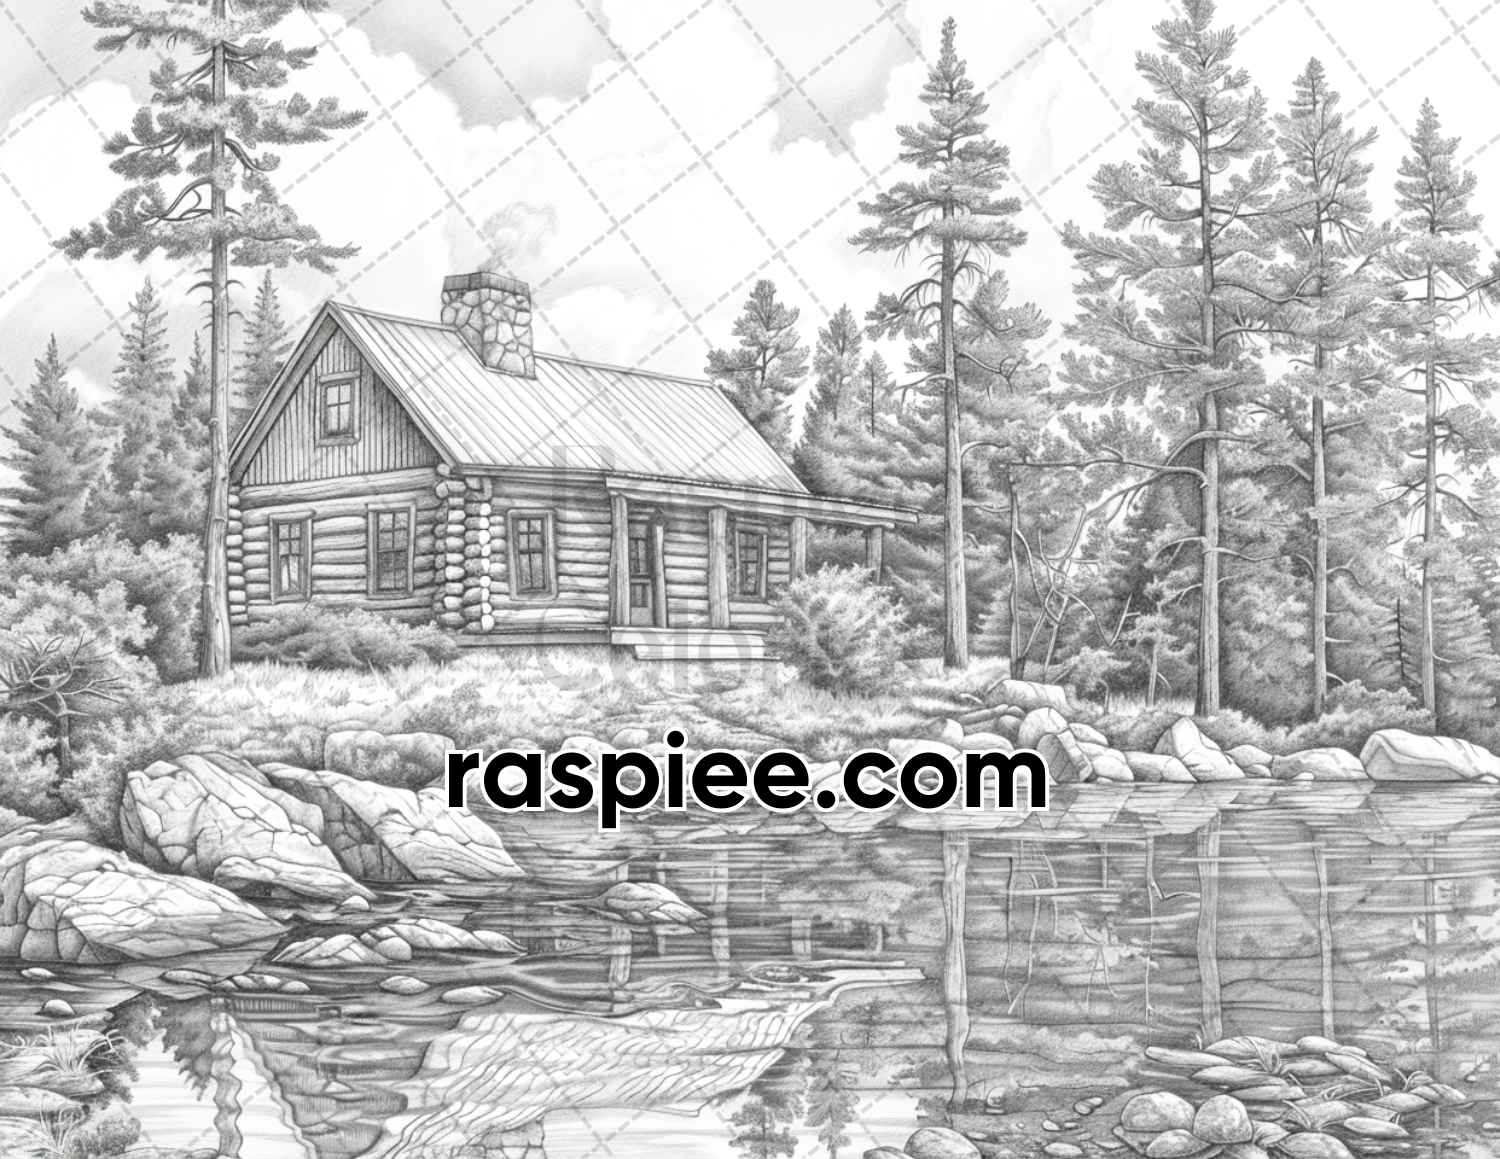 adult coloring pages, adult coloring sheets, adult coloring book pdf, adult coloring book printable, grayscale coloring pages, grayscale coloring books, landscapes coloring pages for adults, landscapes coloring book, grayscale illustration, summer coloring pages, spring coloring pages, autumn coloring pages